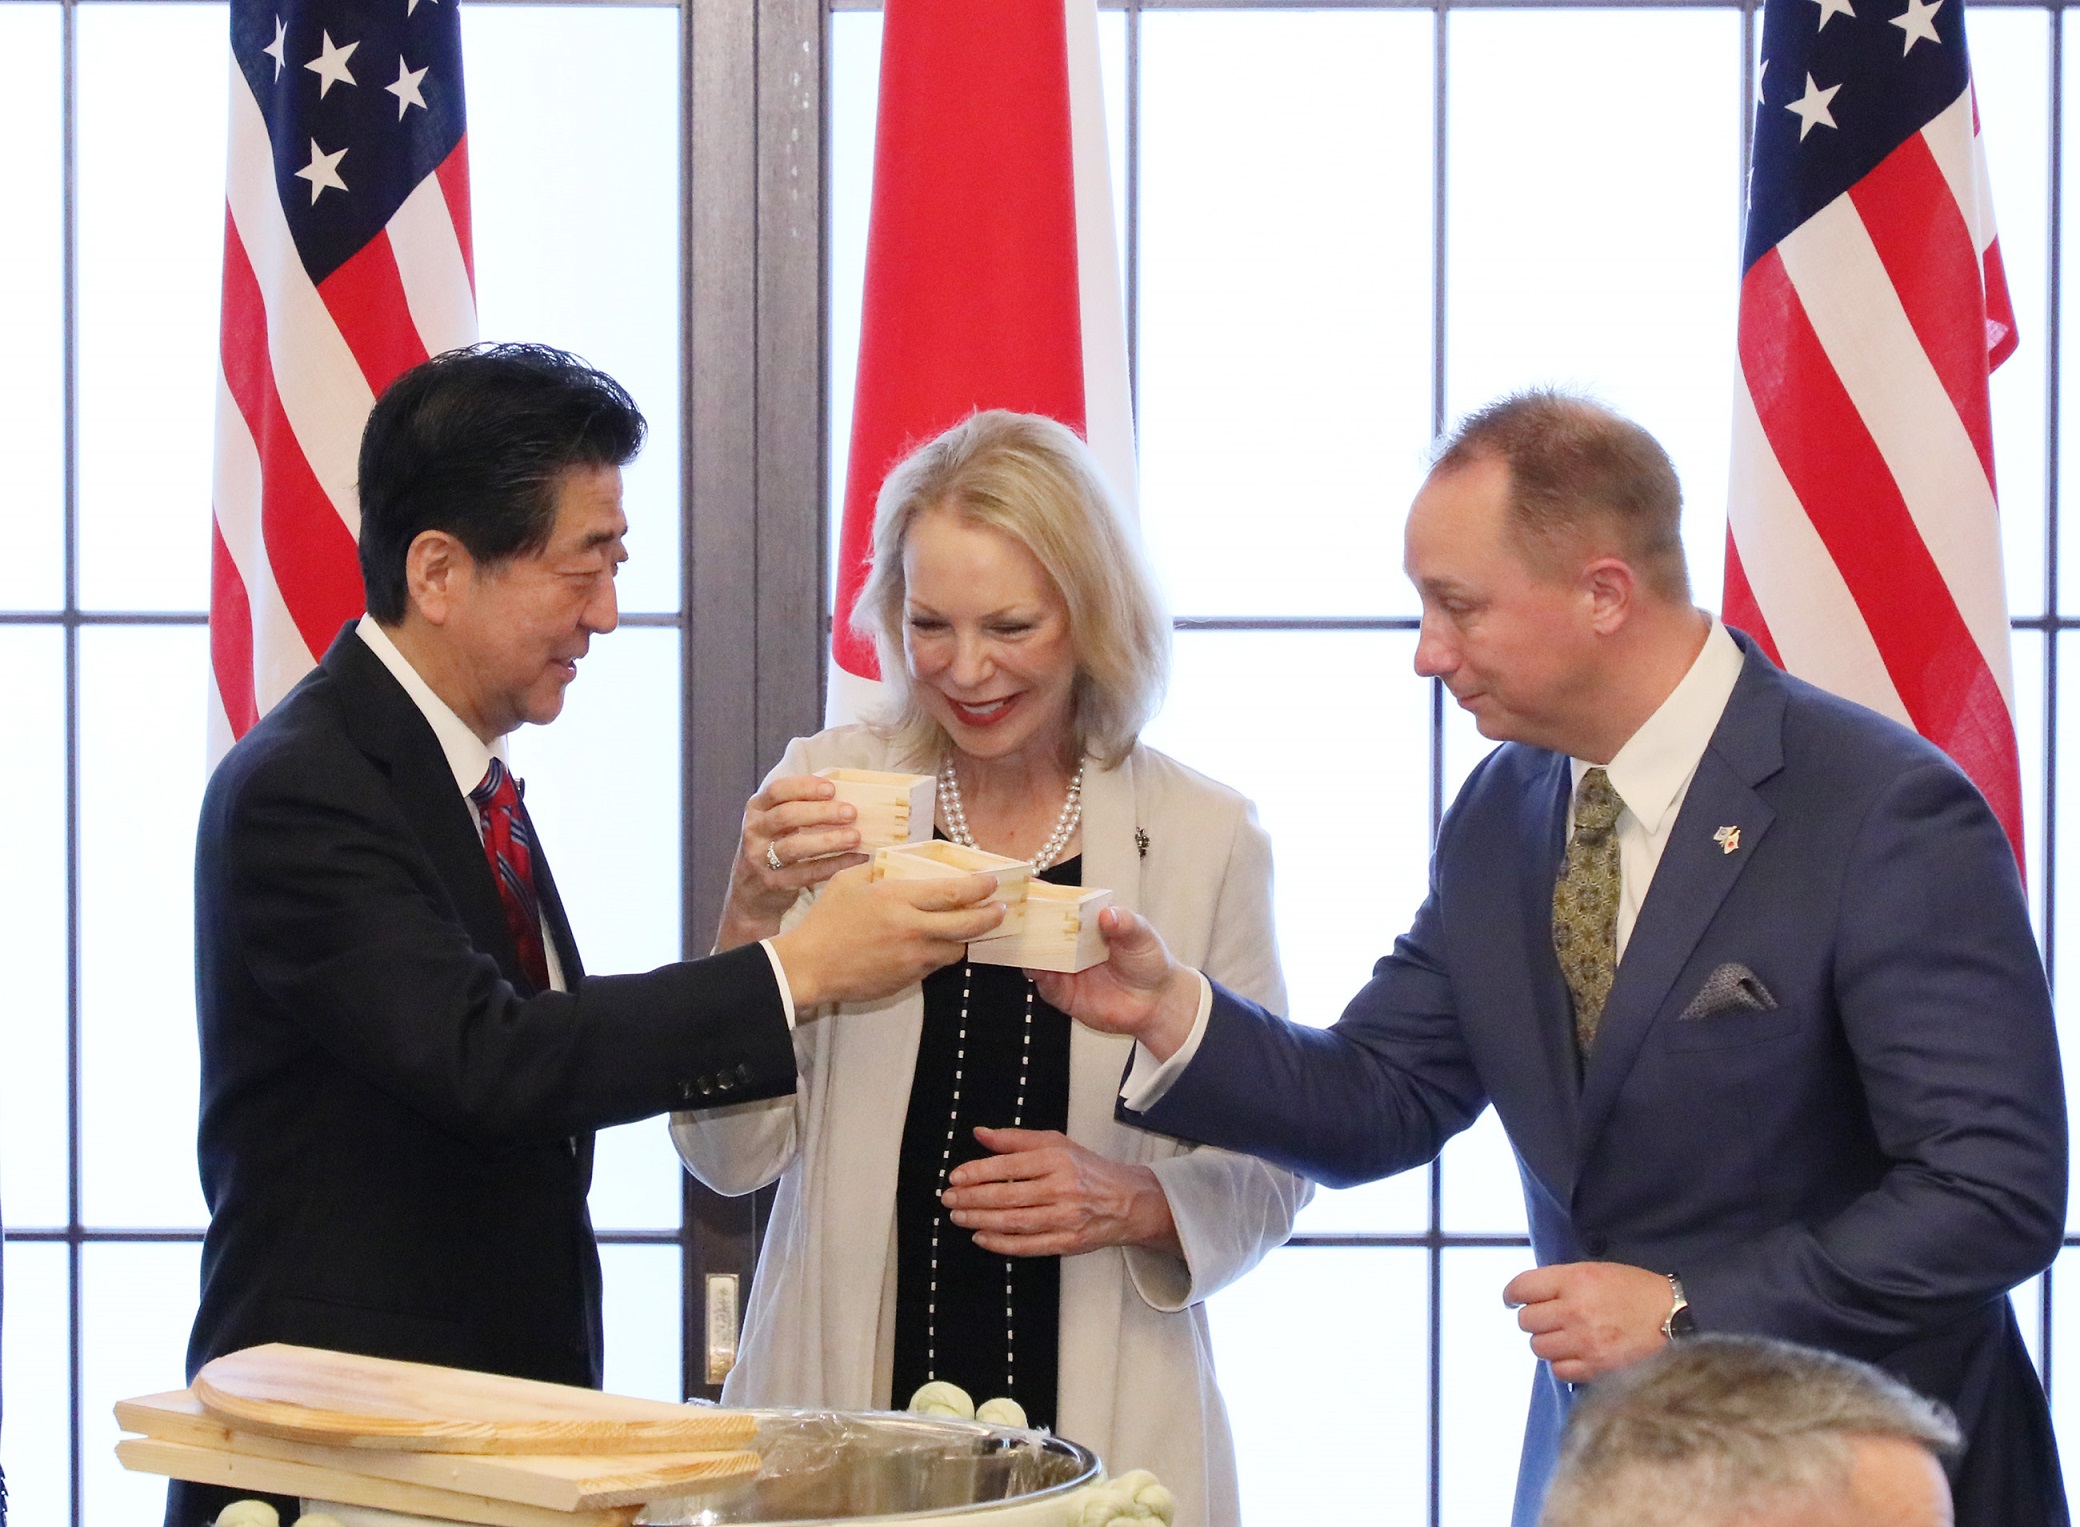 Photograph of the Prime Minister giving a toast (2)